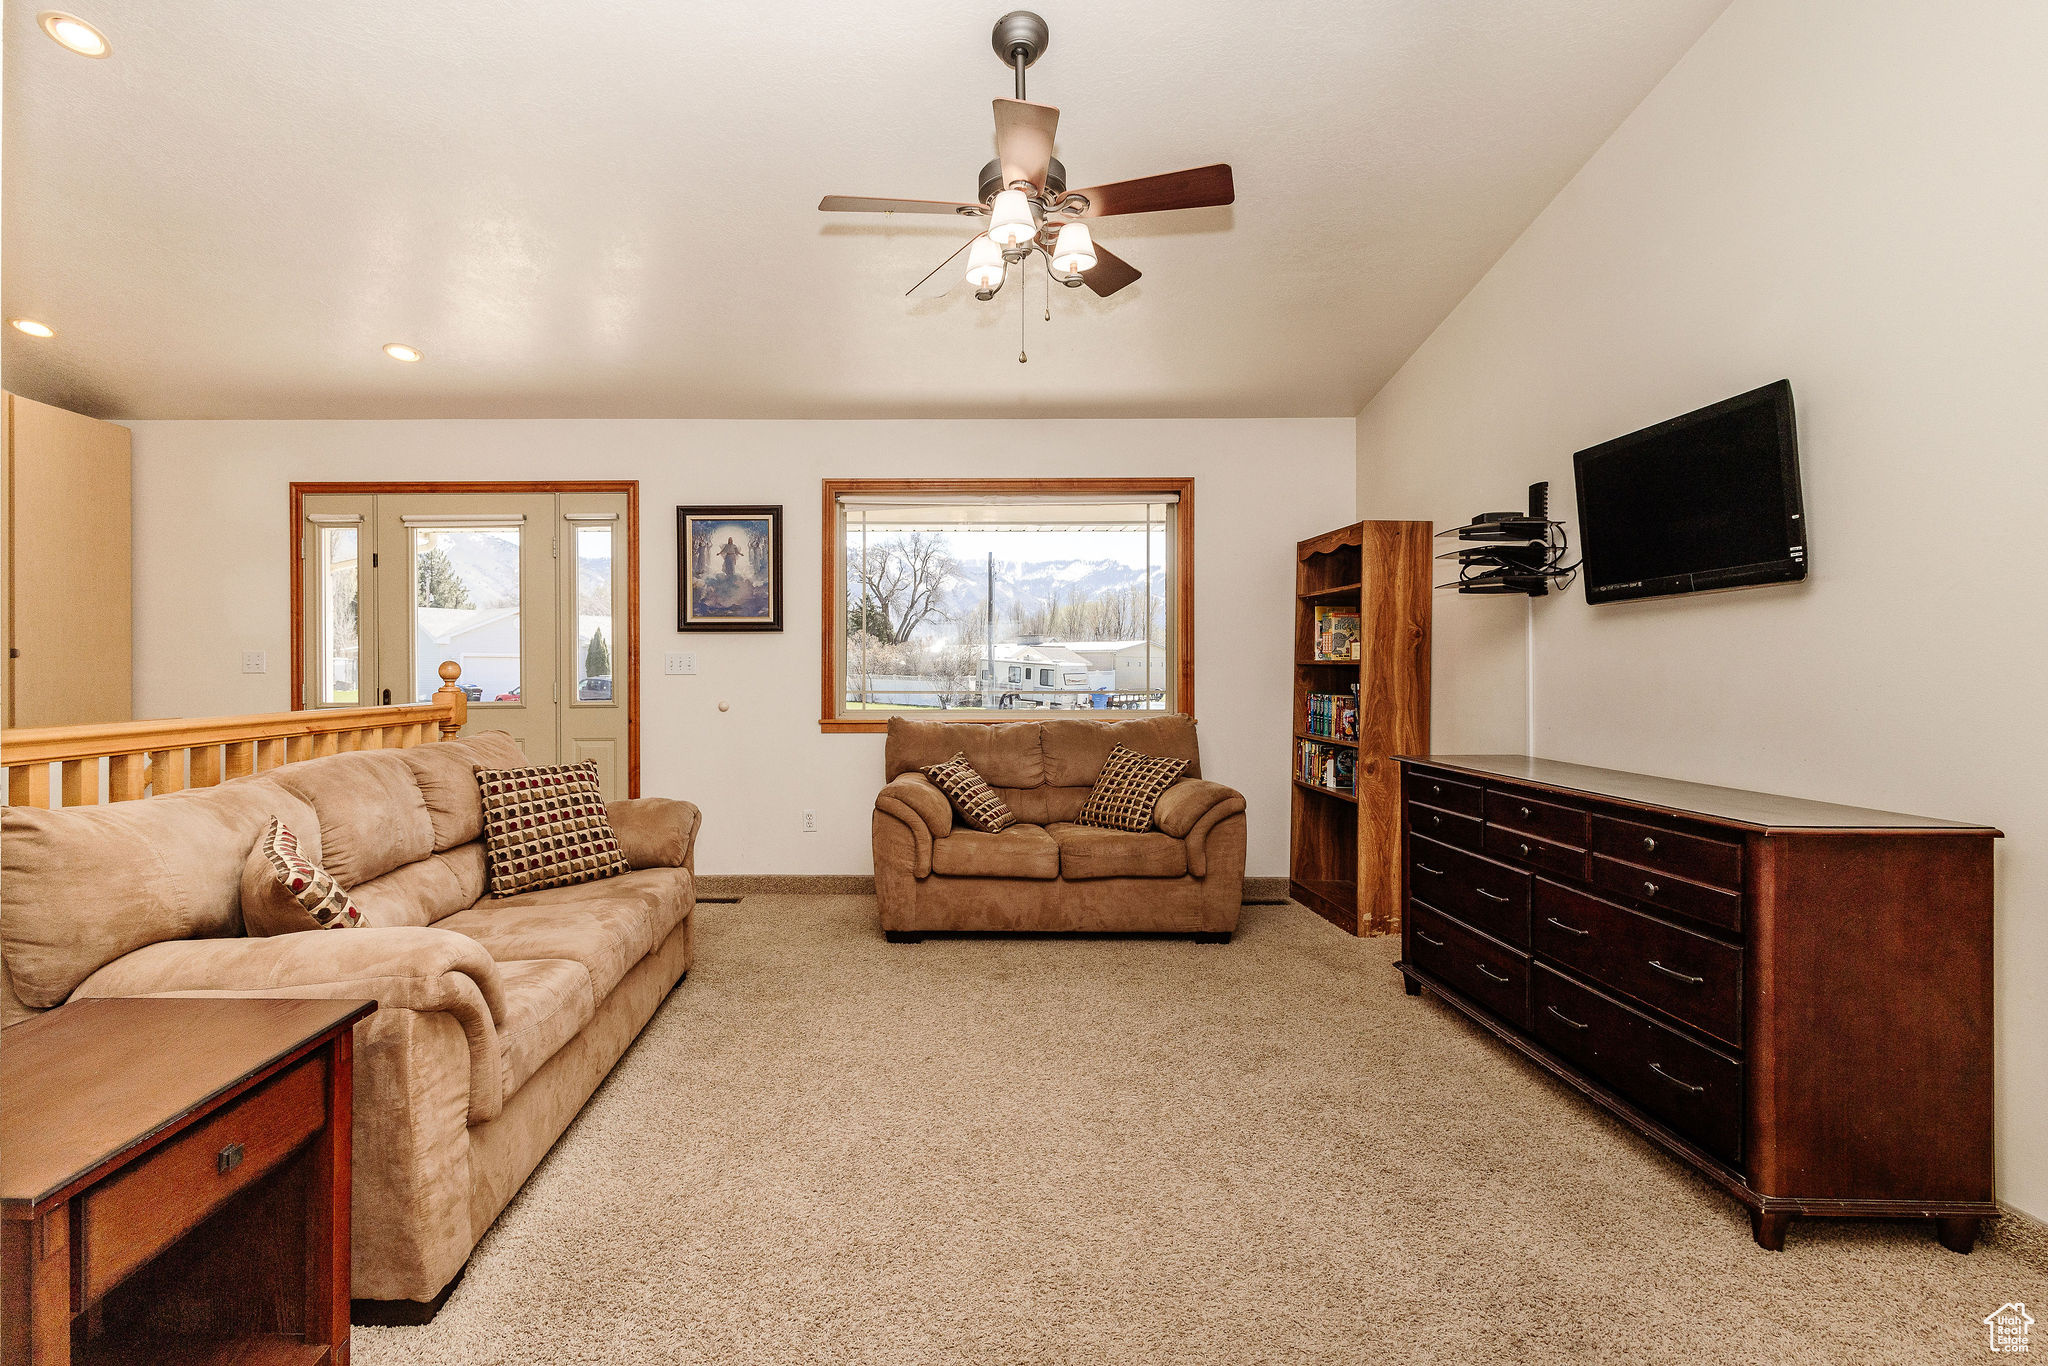 Carpeted living room with vaulted ceiling and ceiling fan